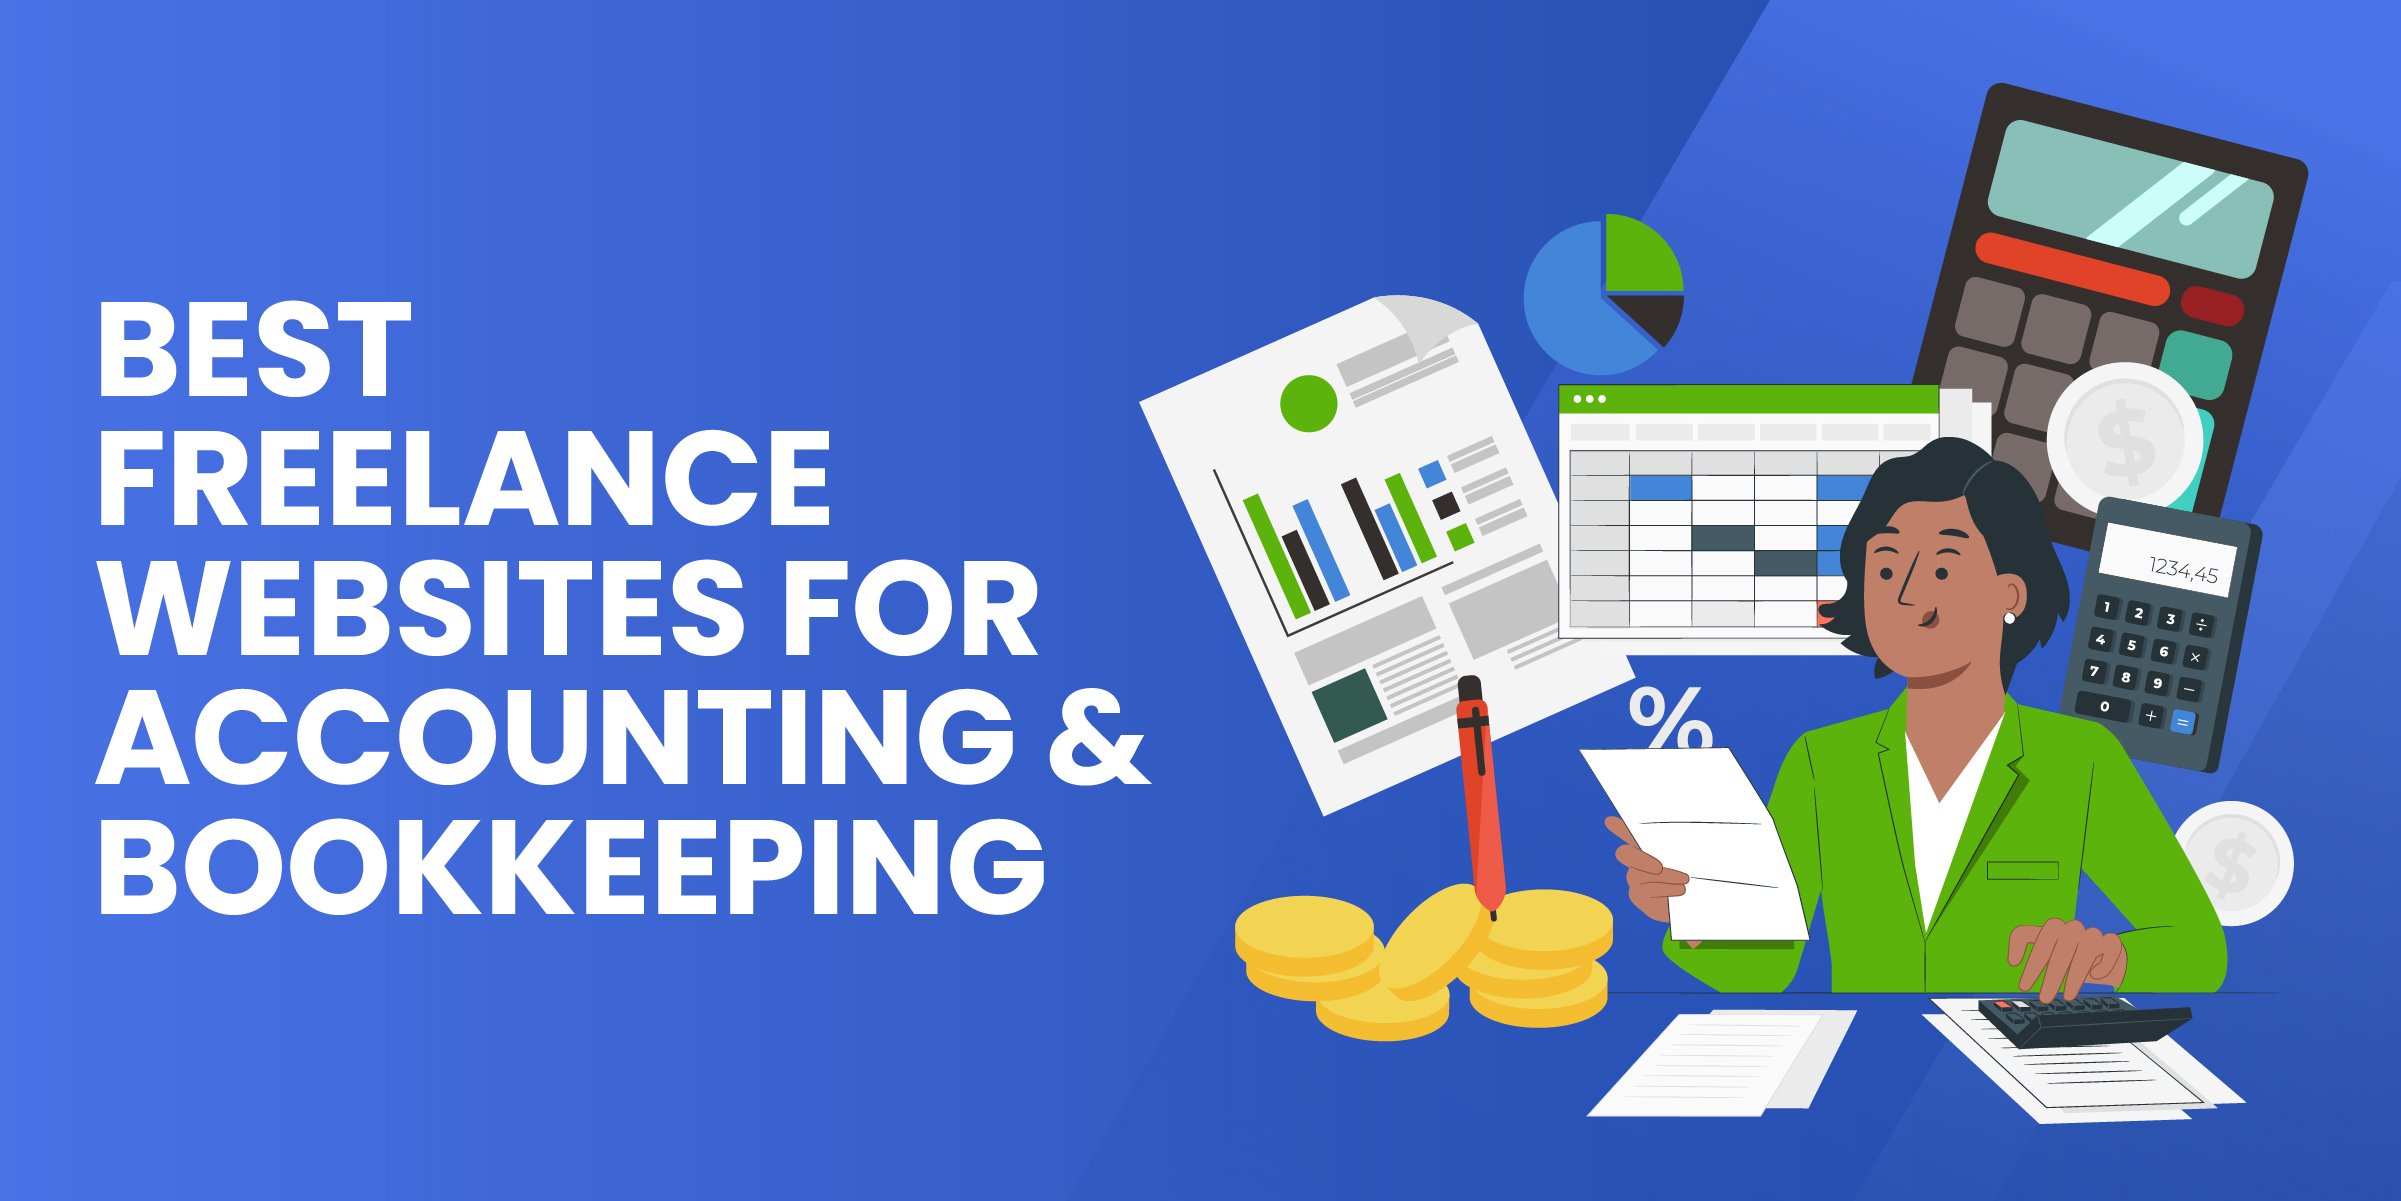 Best Freelance Websites for Accounting